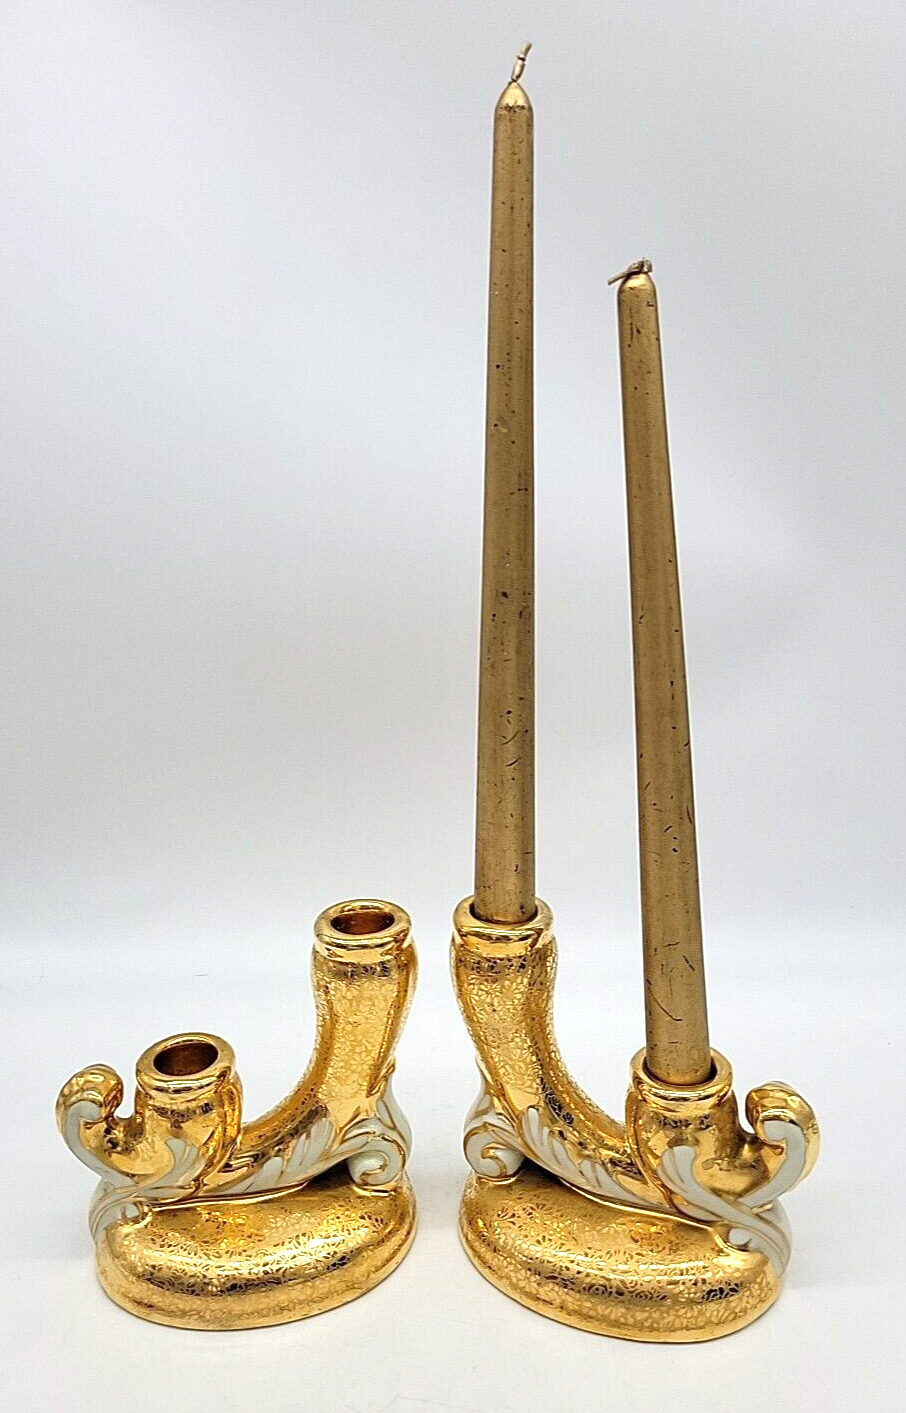 Vtg 1930s Le Mieux 24k Gold Candle Holders Set of 2 Ceramic Hand Painted 5